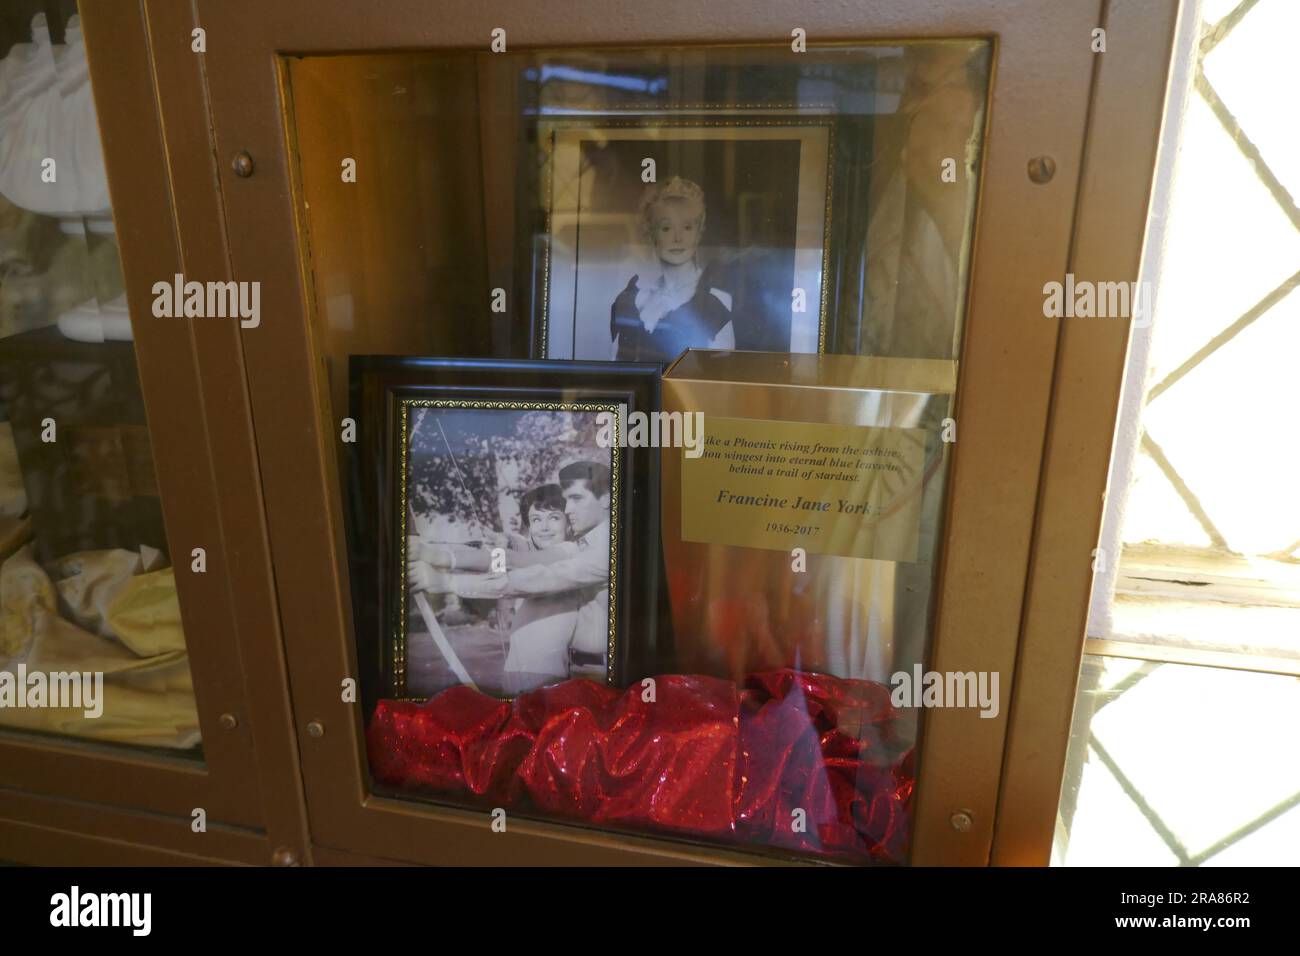 Los Angeles, California, USA 1st July 2023 Actress Francine York Grave/Niche in Chapel Columbarium at Hollywood Forever Cemetery on July 1, 2023 in Los Angeles, California, USA. Photo by Barry King/Alamy Stock Photo Stock Photo